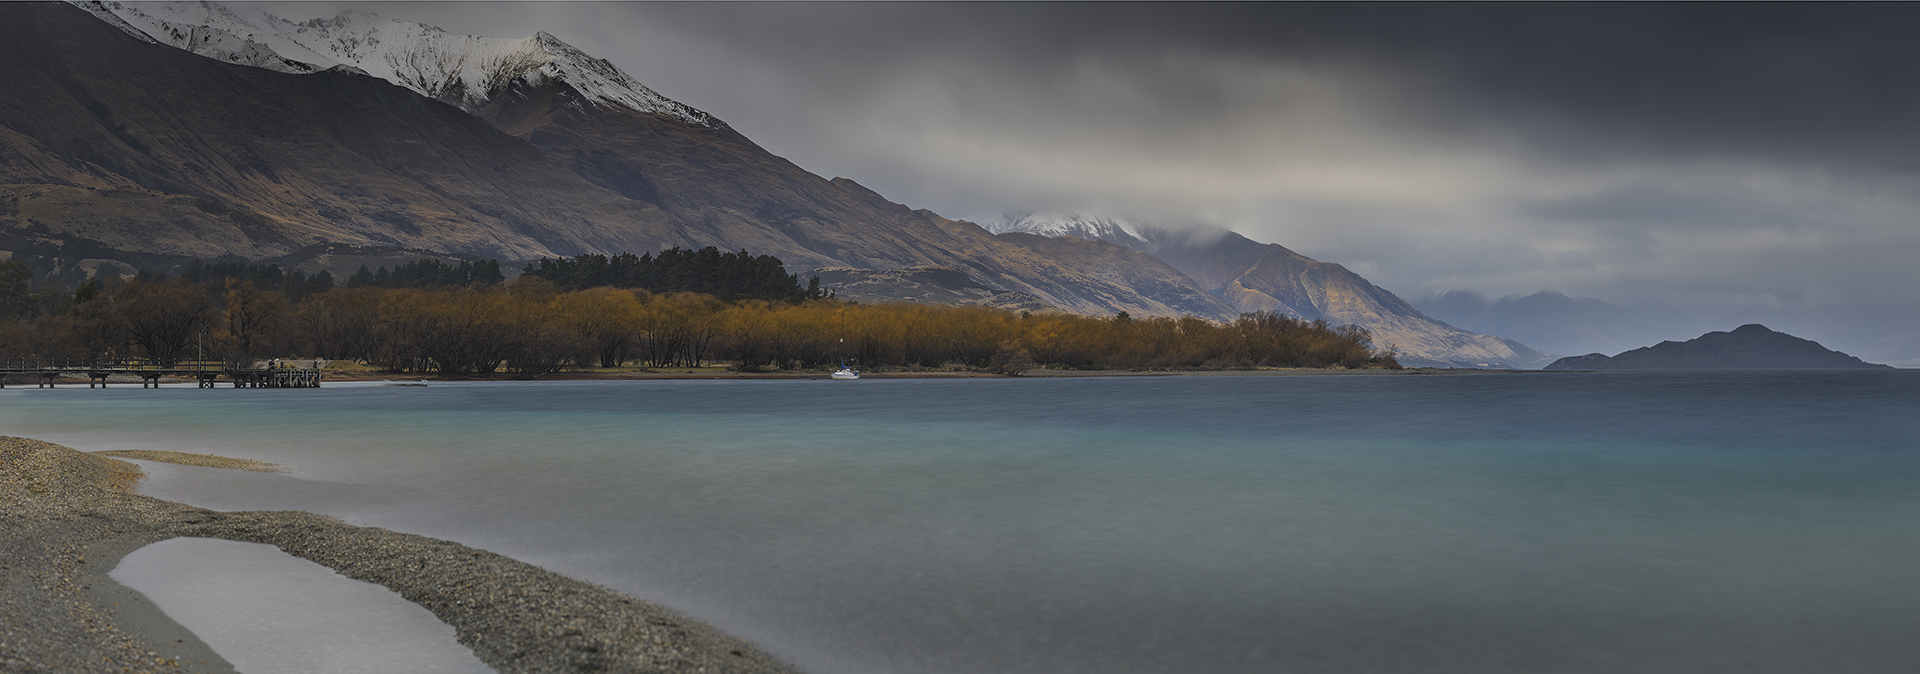 Glenorchy in Colour, NZ